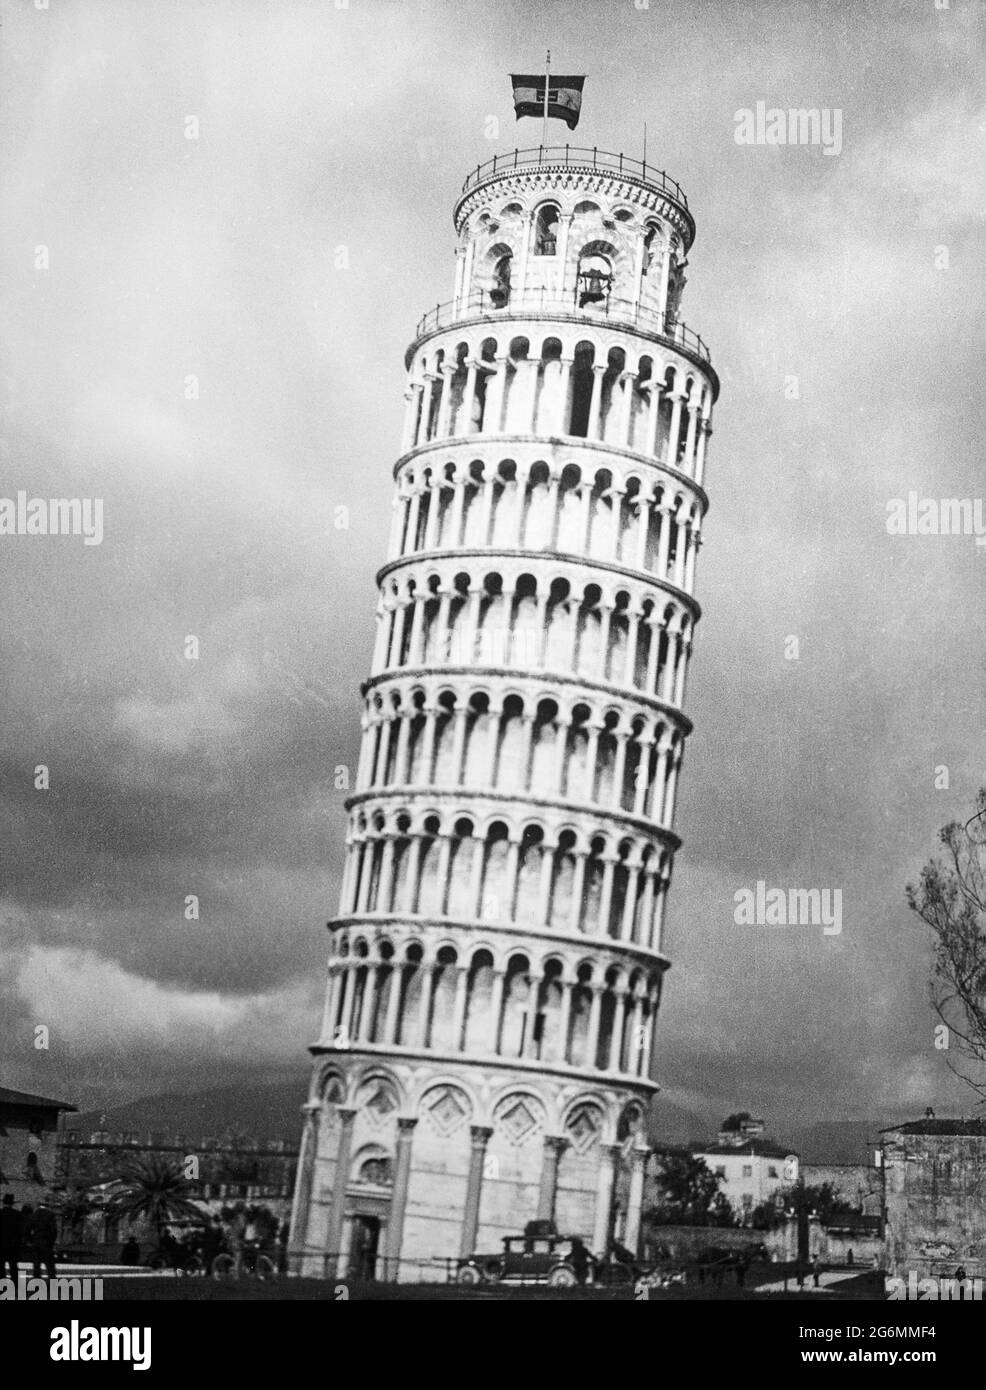 An early 20th century vintage black and white photograph of the leaning tower of Pisa in Italy. Stock Photo